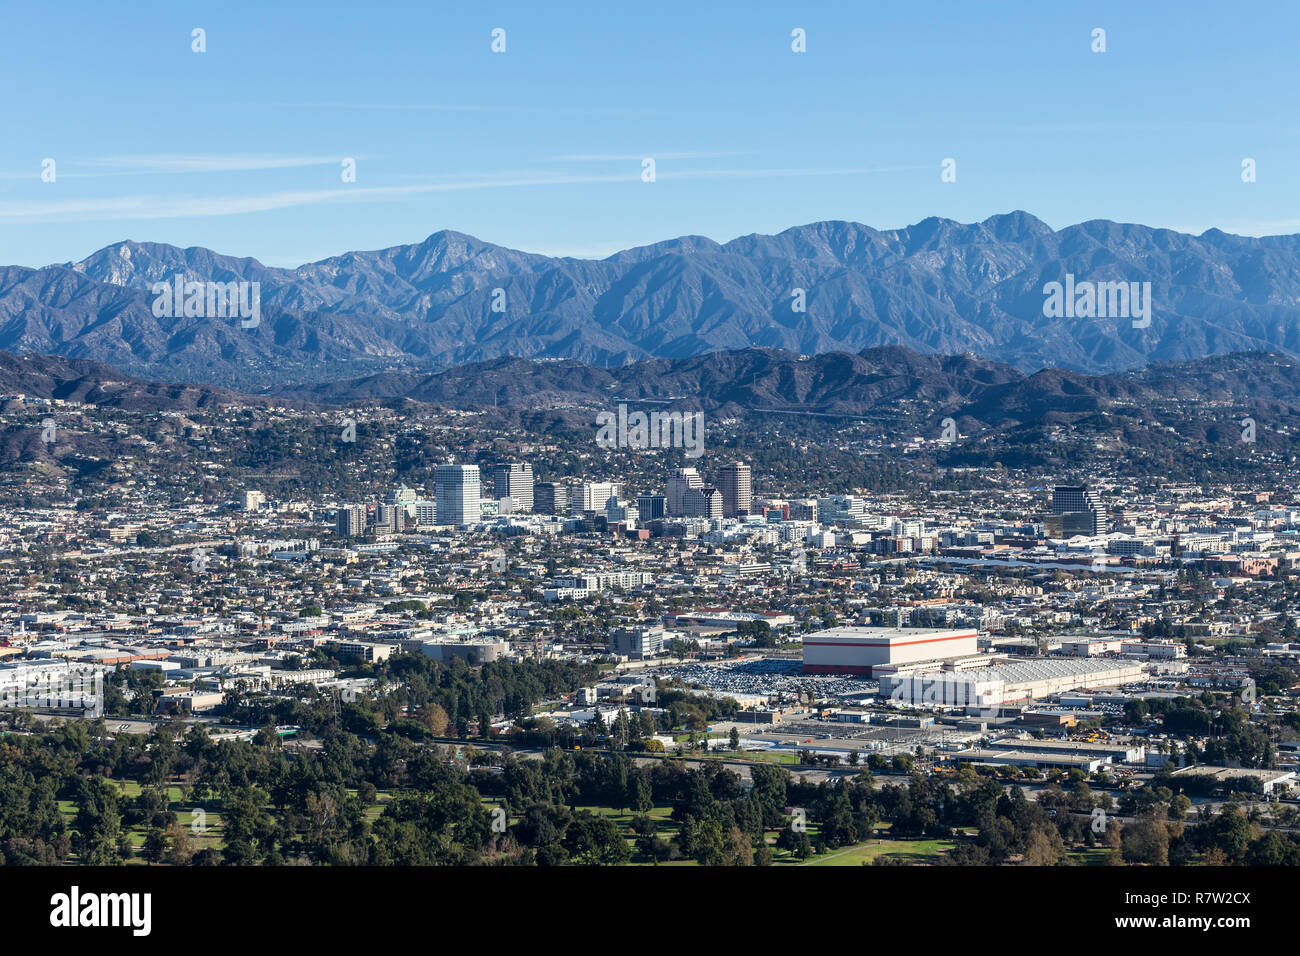 Downtown Glendale and the San Gabriel Mountains in Los Angeles County, California. Stock Photo